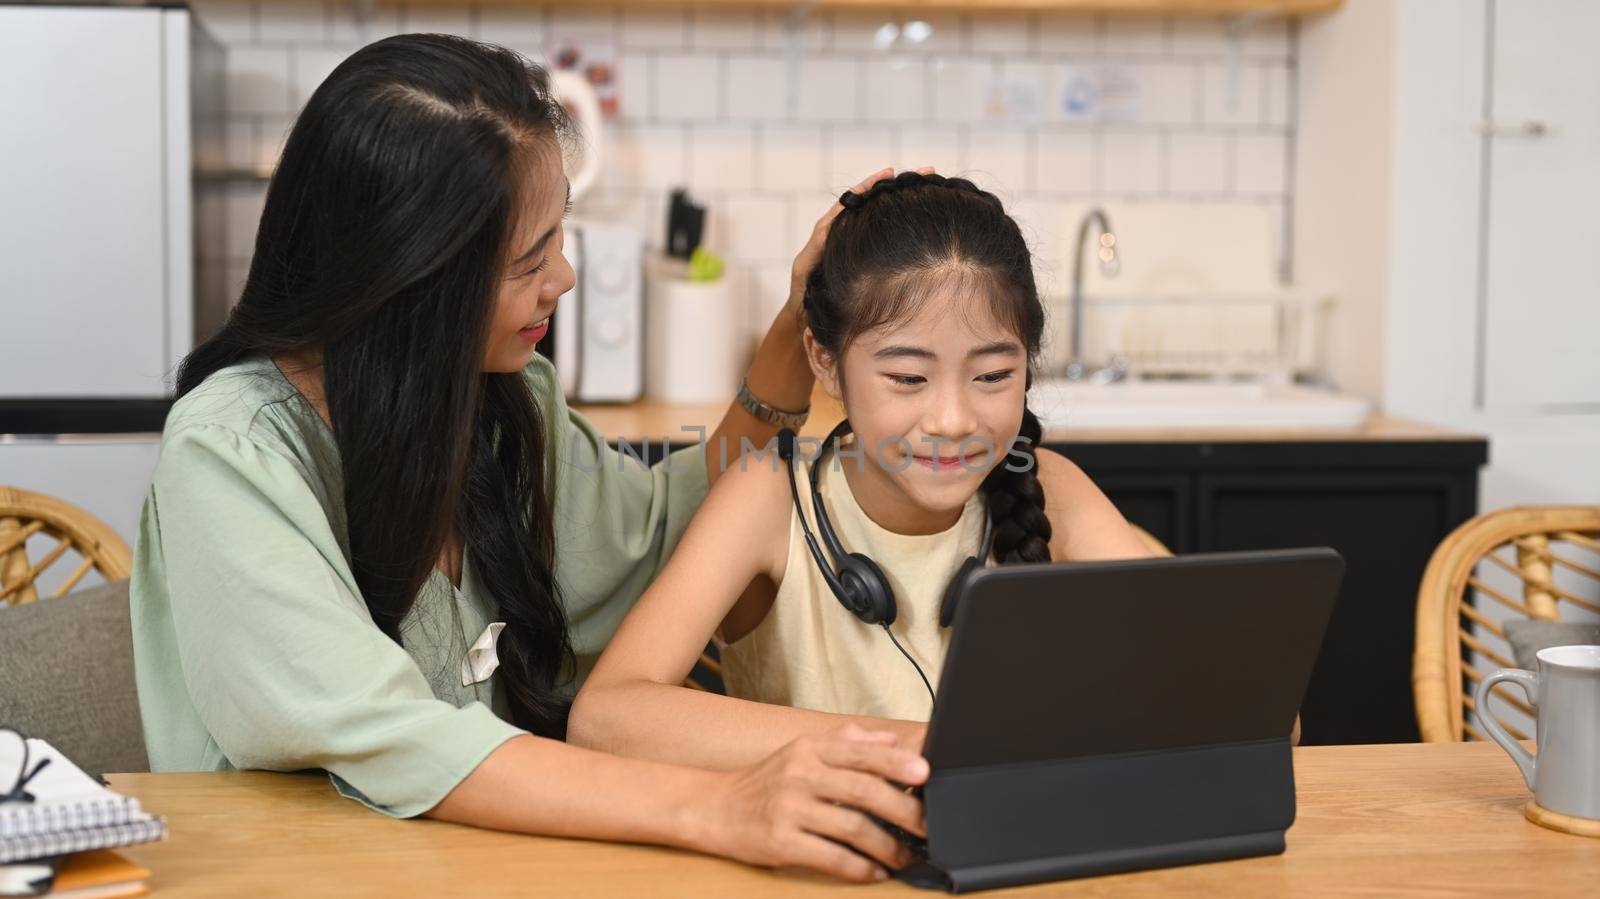 Adorable little asian girl doing homework, learning online at home and her mother sitting nearby and giving support.